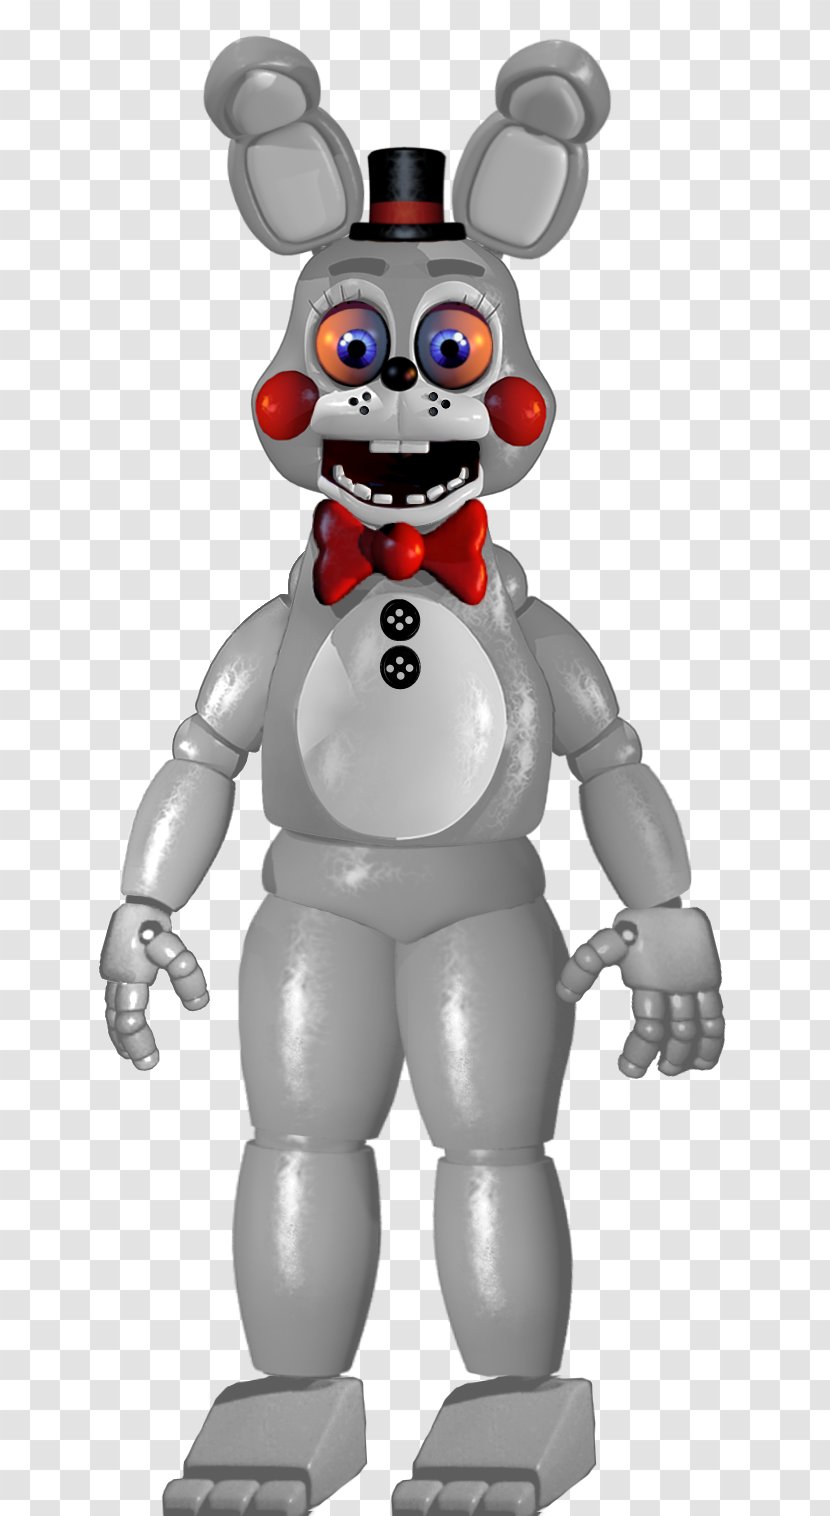 Five Nights At Freddy's 2 4 3 Bonnie - Jump Scare - Toy Rabbit Transparent PNG